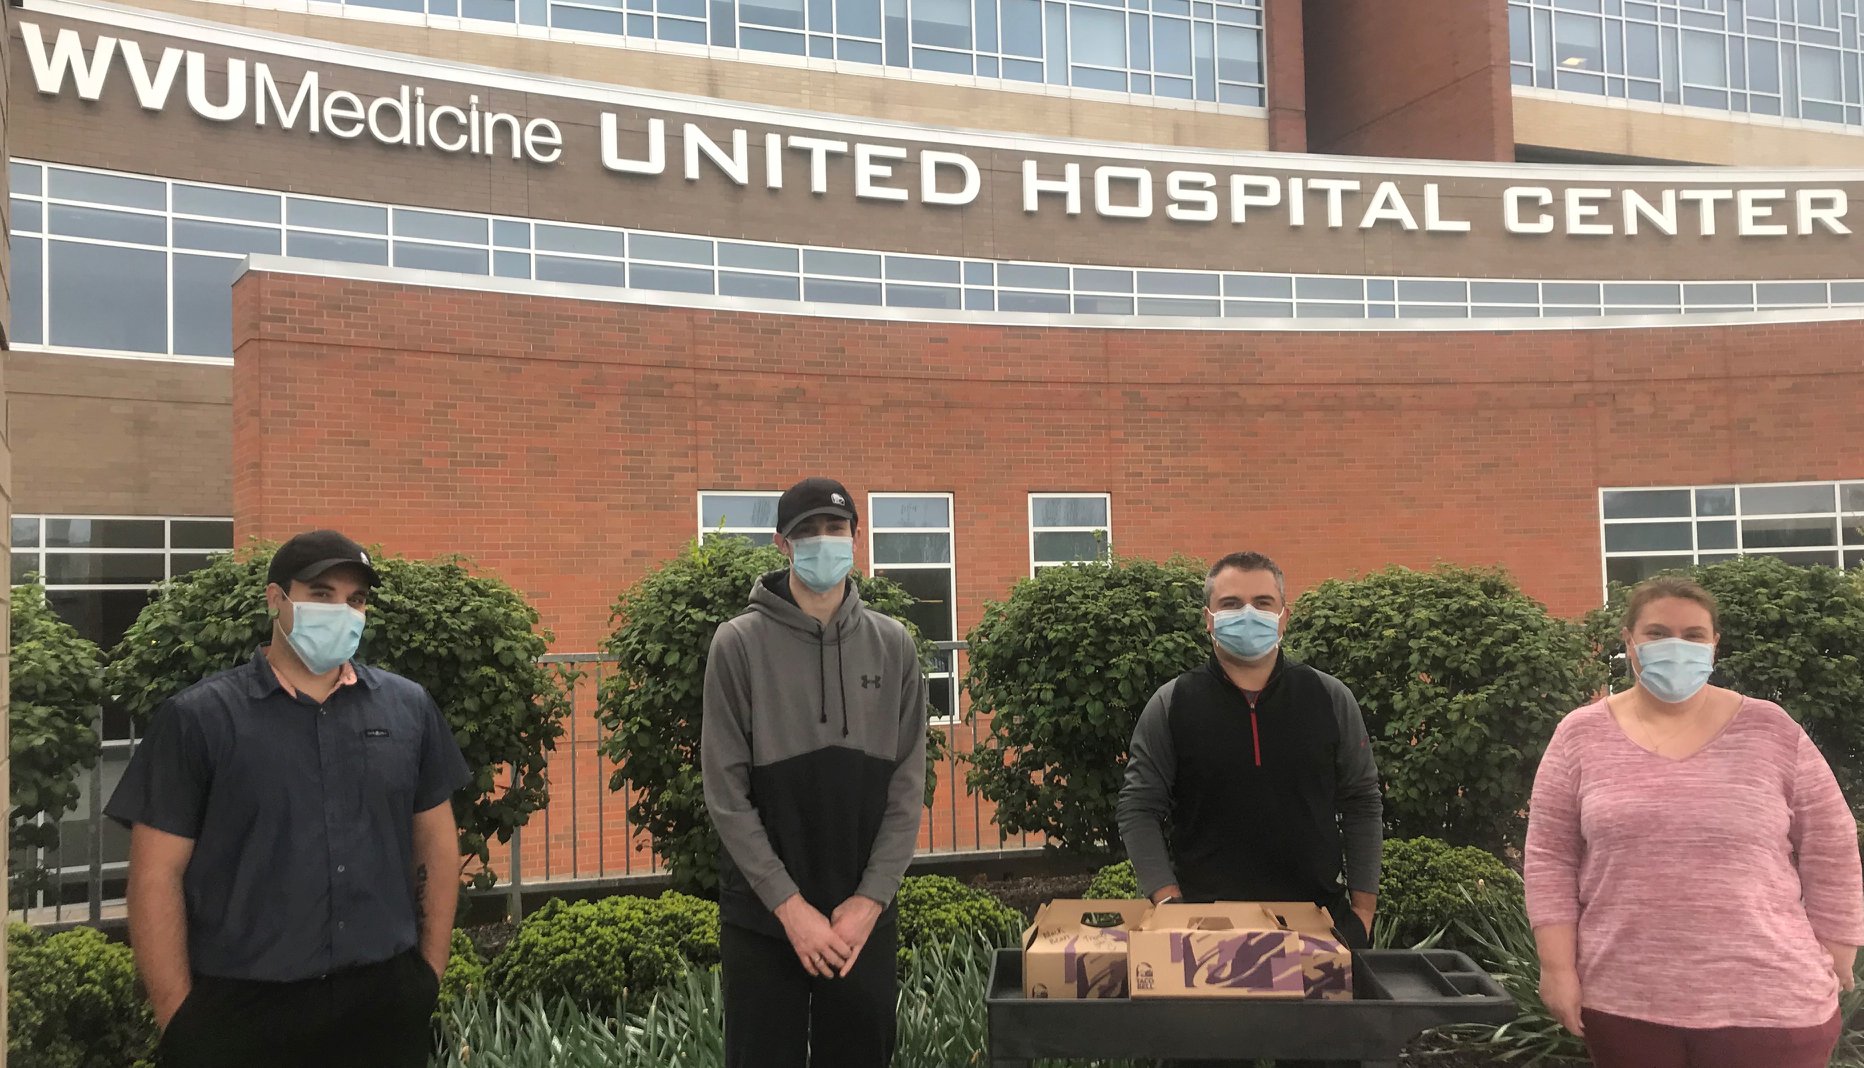 Donors outside United Hospital Center with masks on